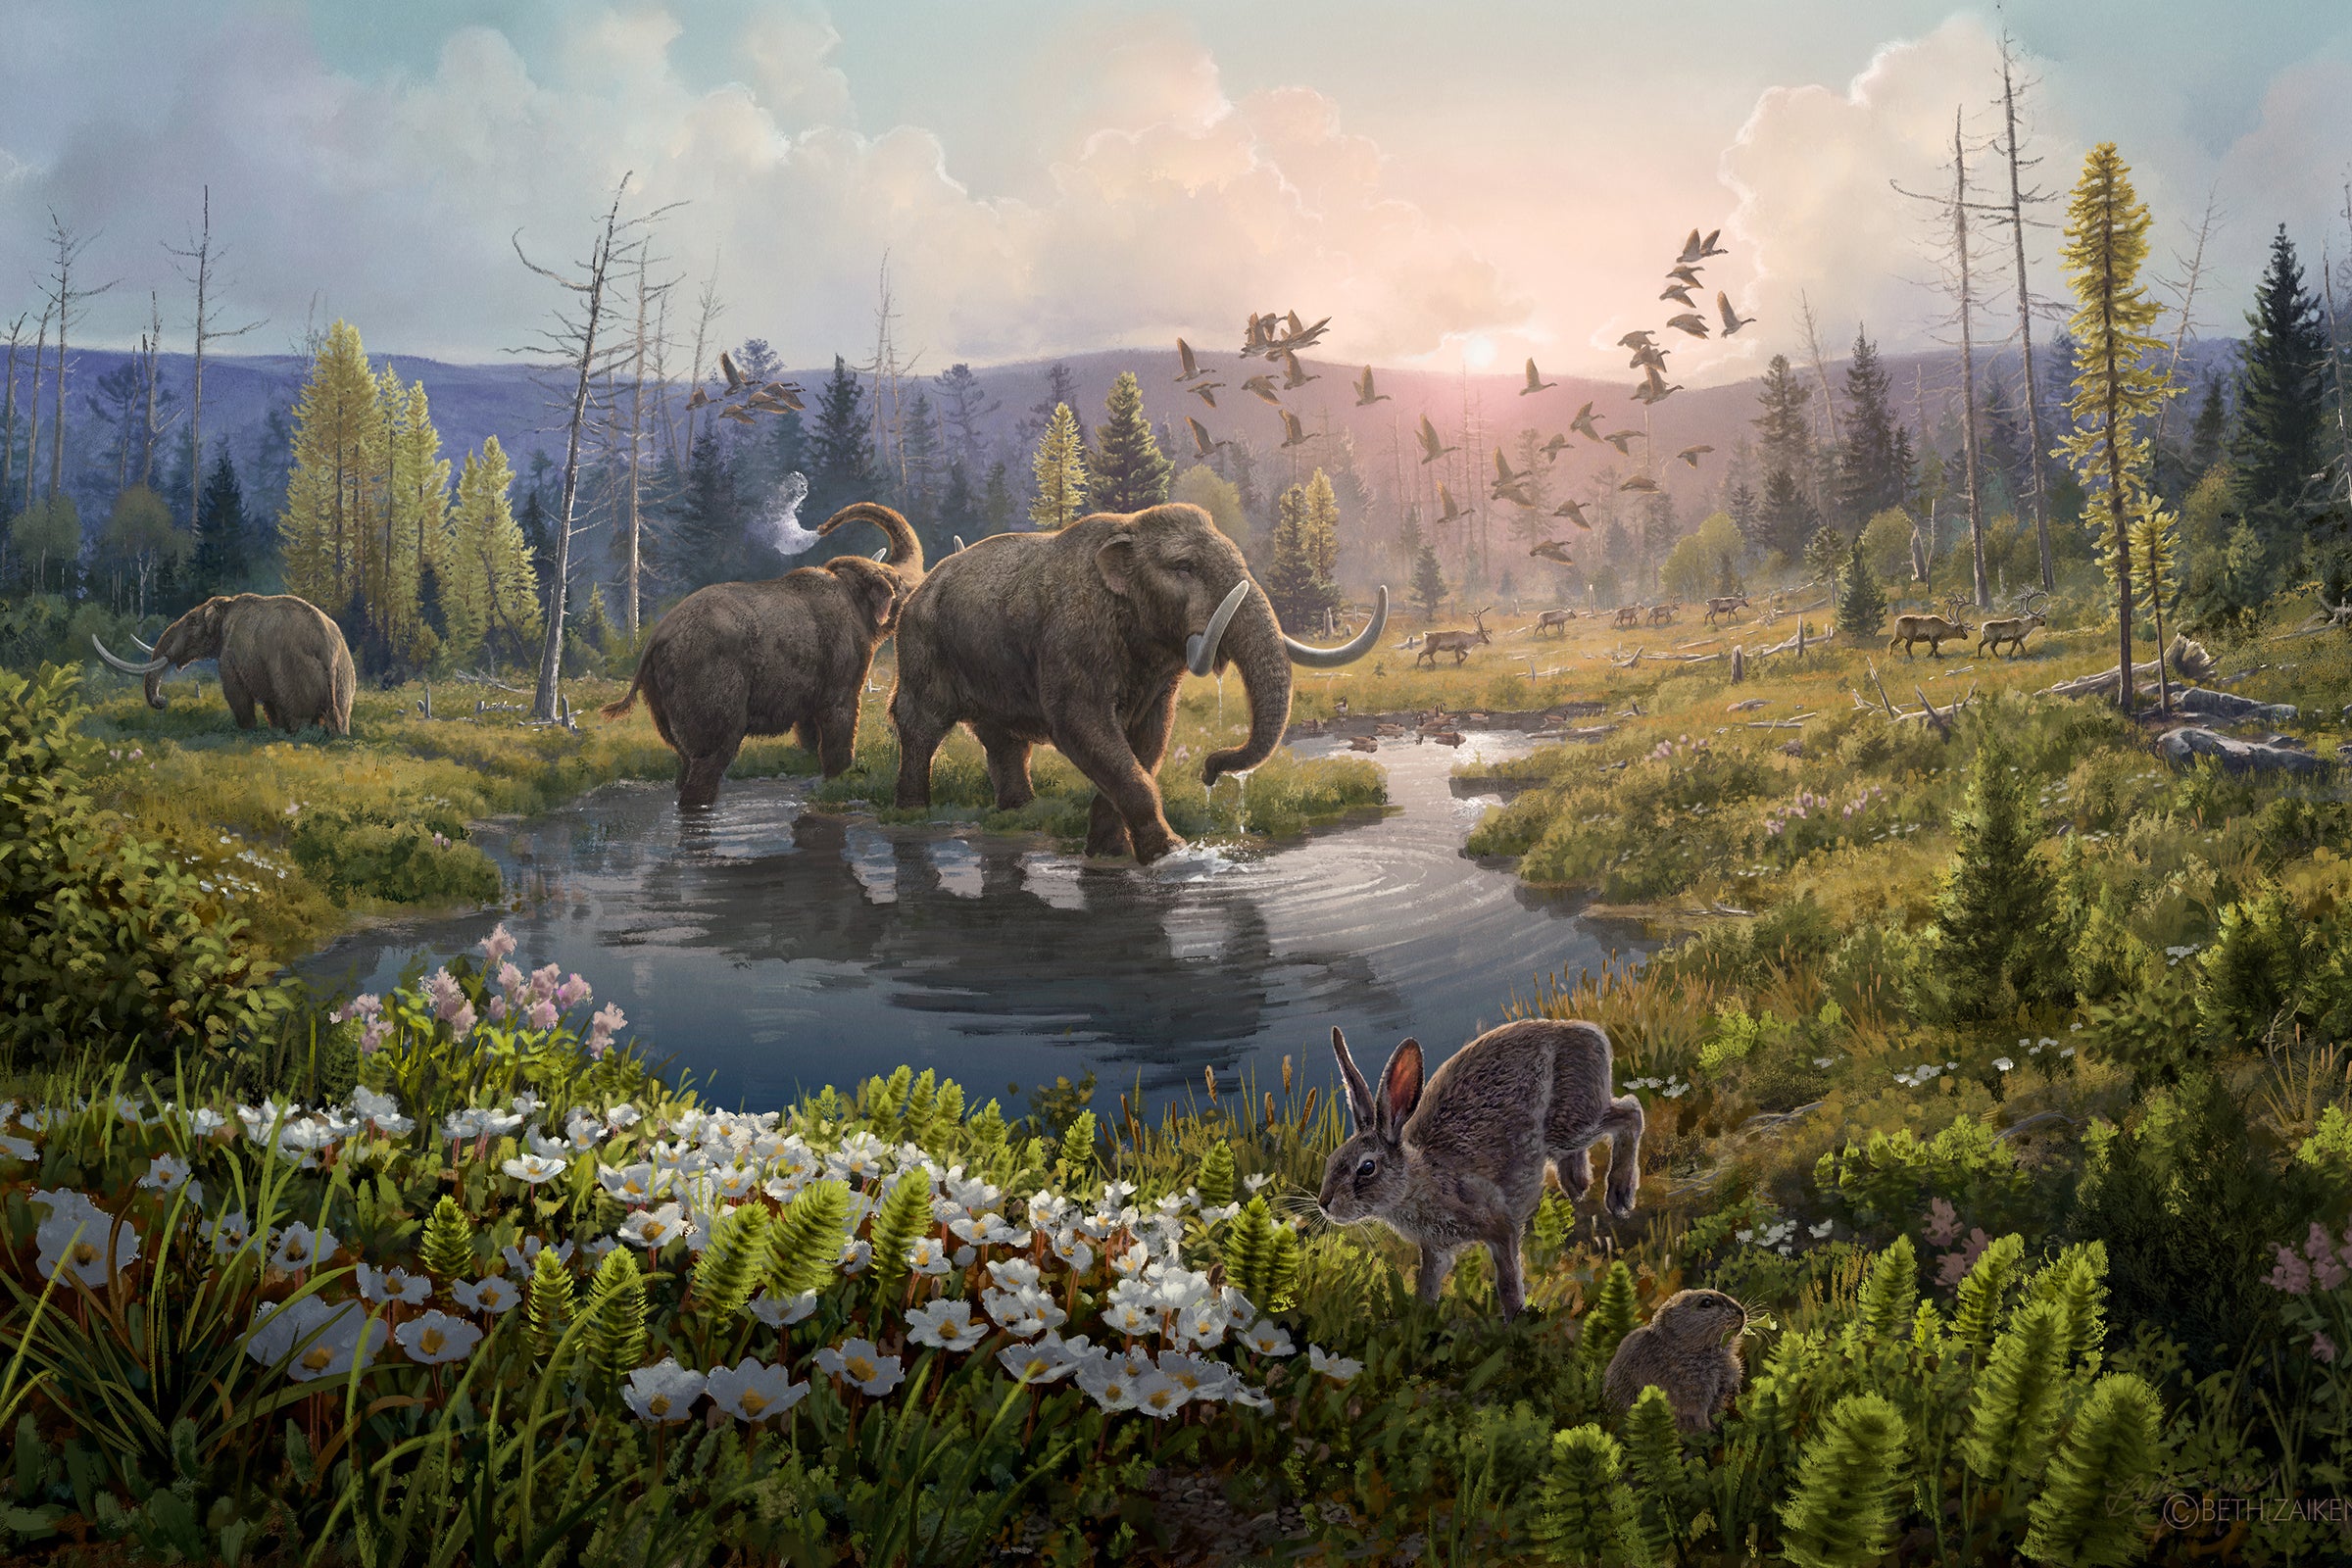 World's Oldest DNA Discovered, Revealing Ancient Arctic Forest Full of Mastodons - Scientific American